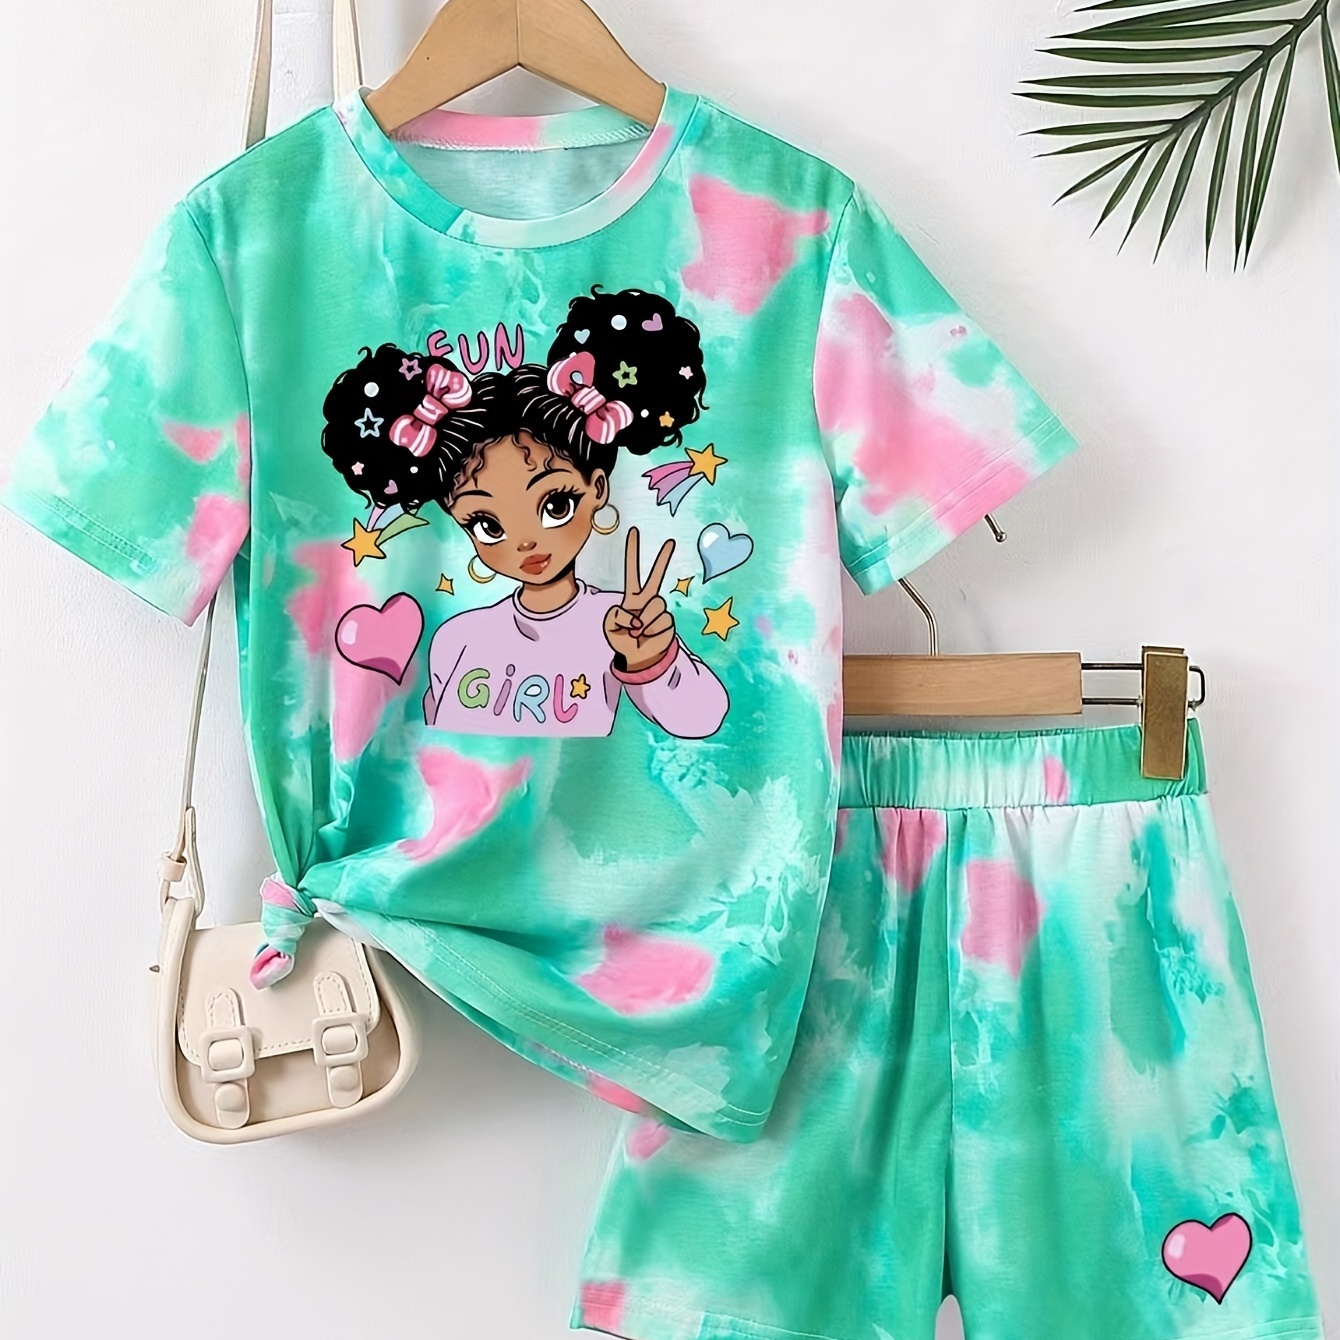 

2 Pcs Green Tie Dye Figure Print Short Sleeve Top + Shorts Co-ords Set For Casual Outings, Girls Summer Outfit Clothes